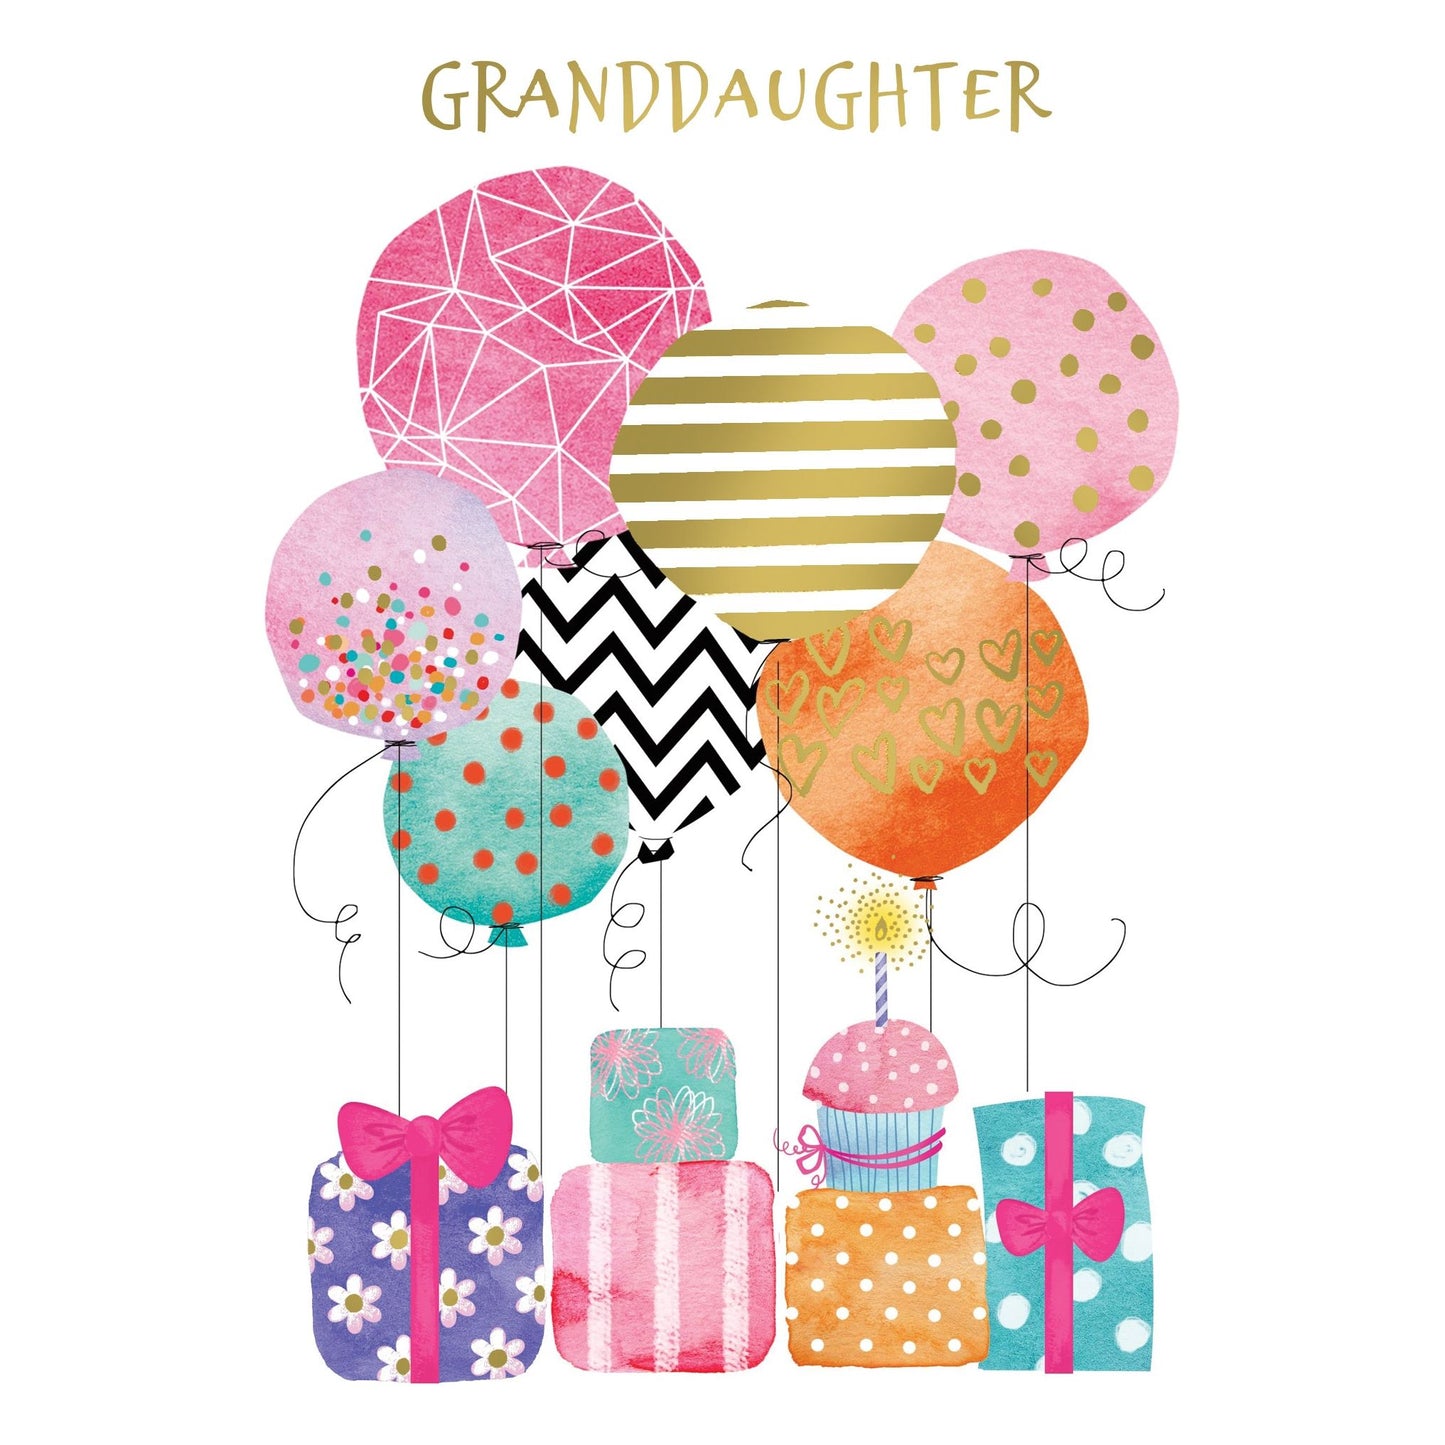 Birthday Granddaughter Card Balloons And Presents - Cardmore